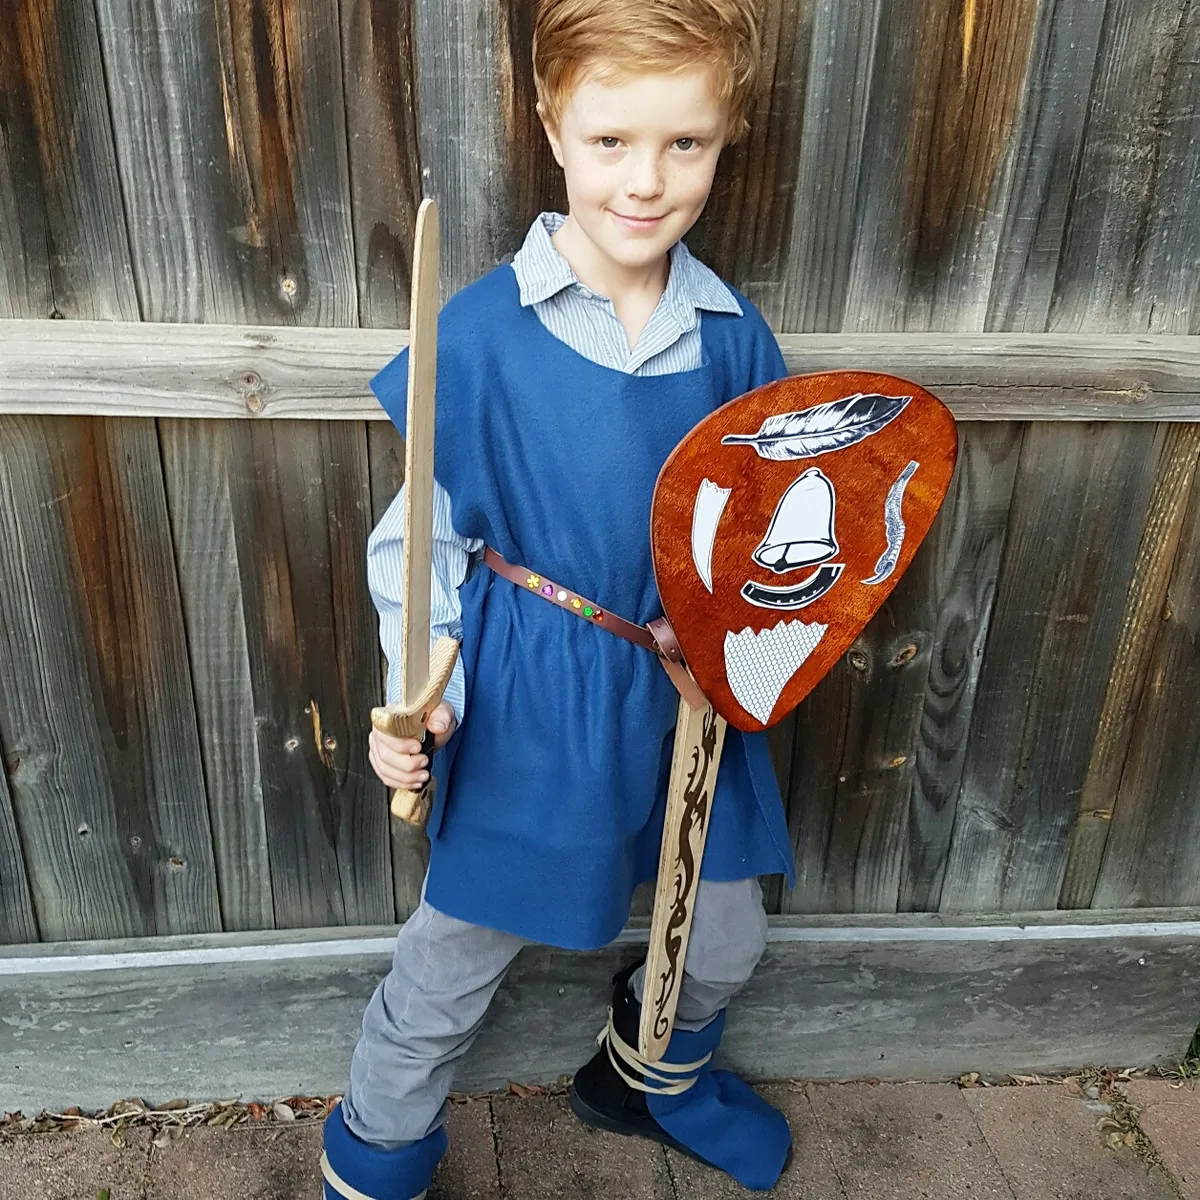 Boy dressed as Tom from Beast Quest books